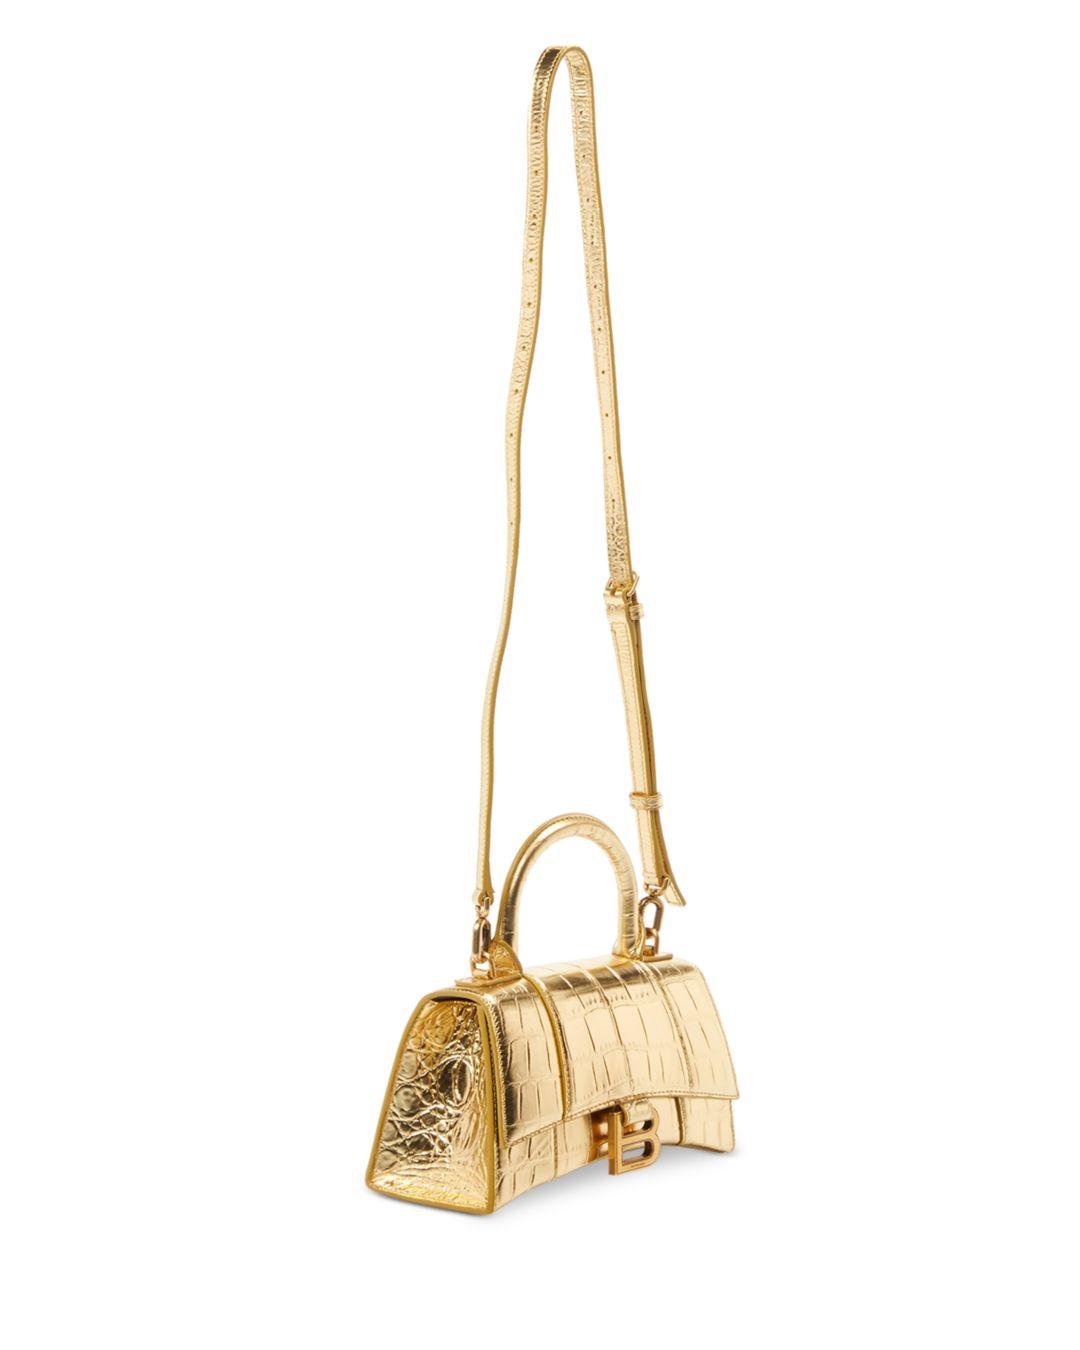 Balenciaga Leather Hourglass Xs Top Handle Bag in Gold Embossed/Gold  (Metallic) | Lyst